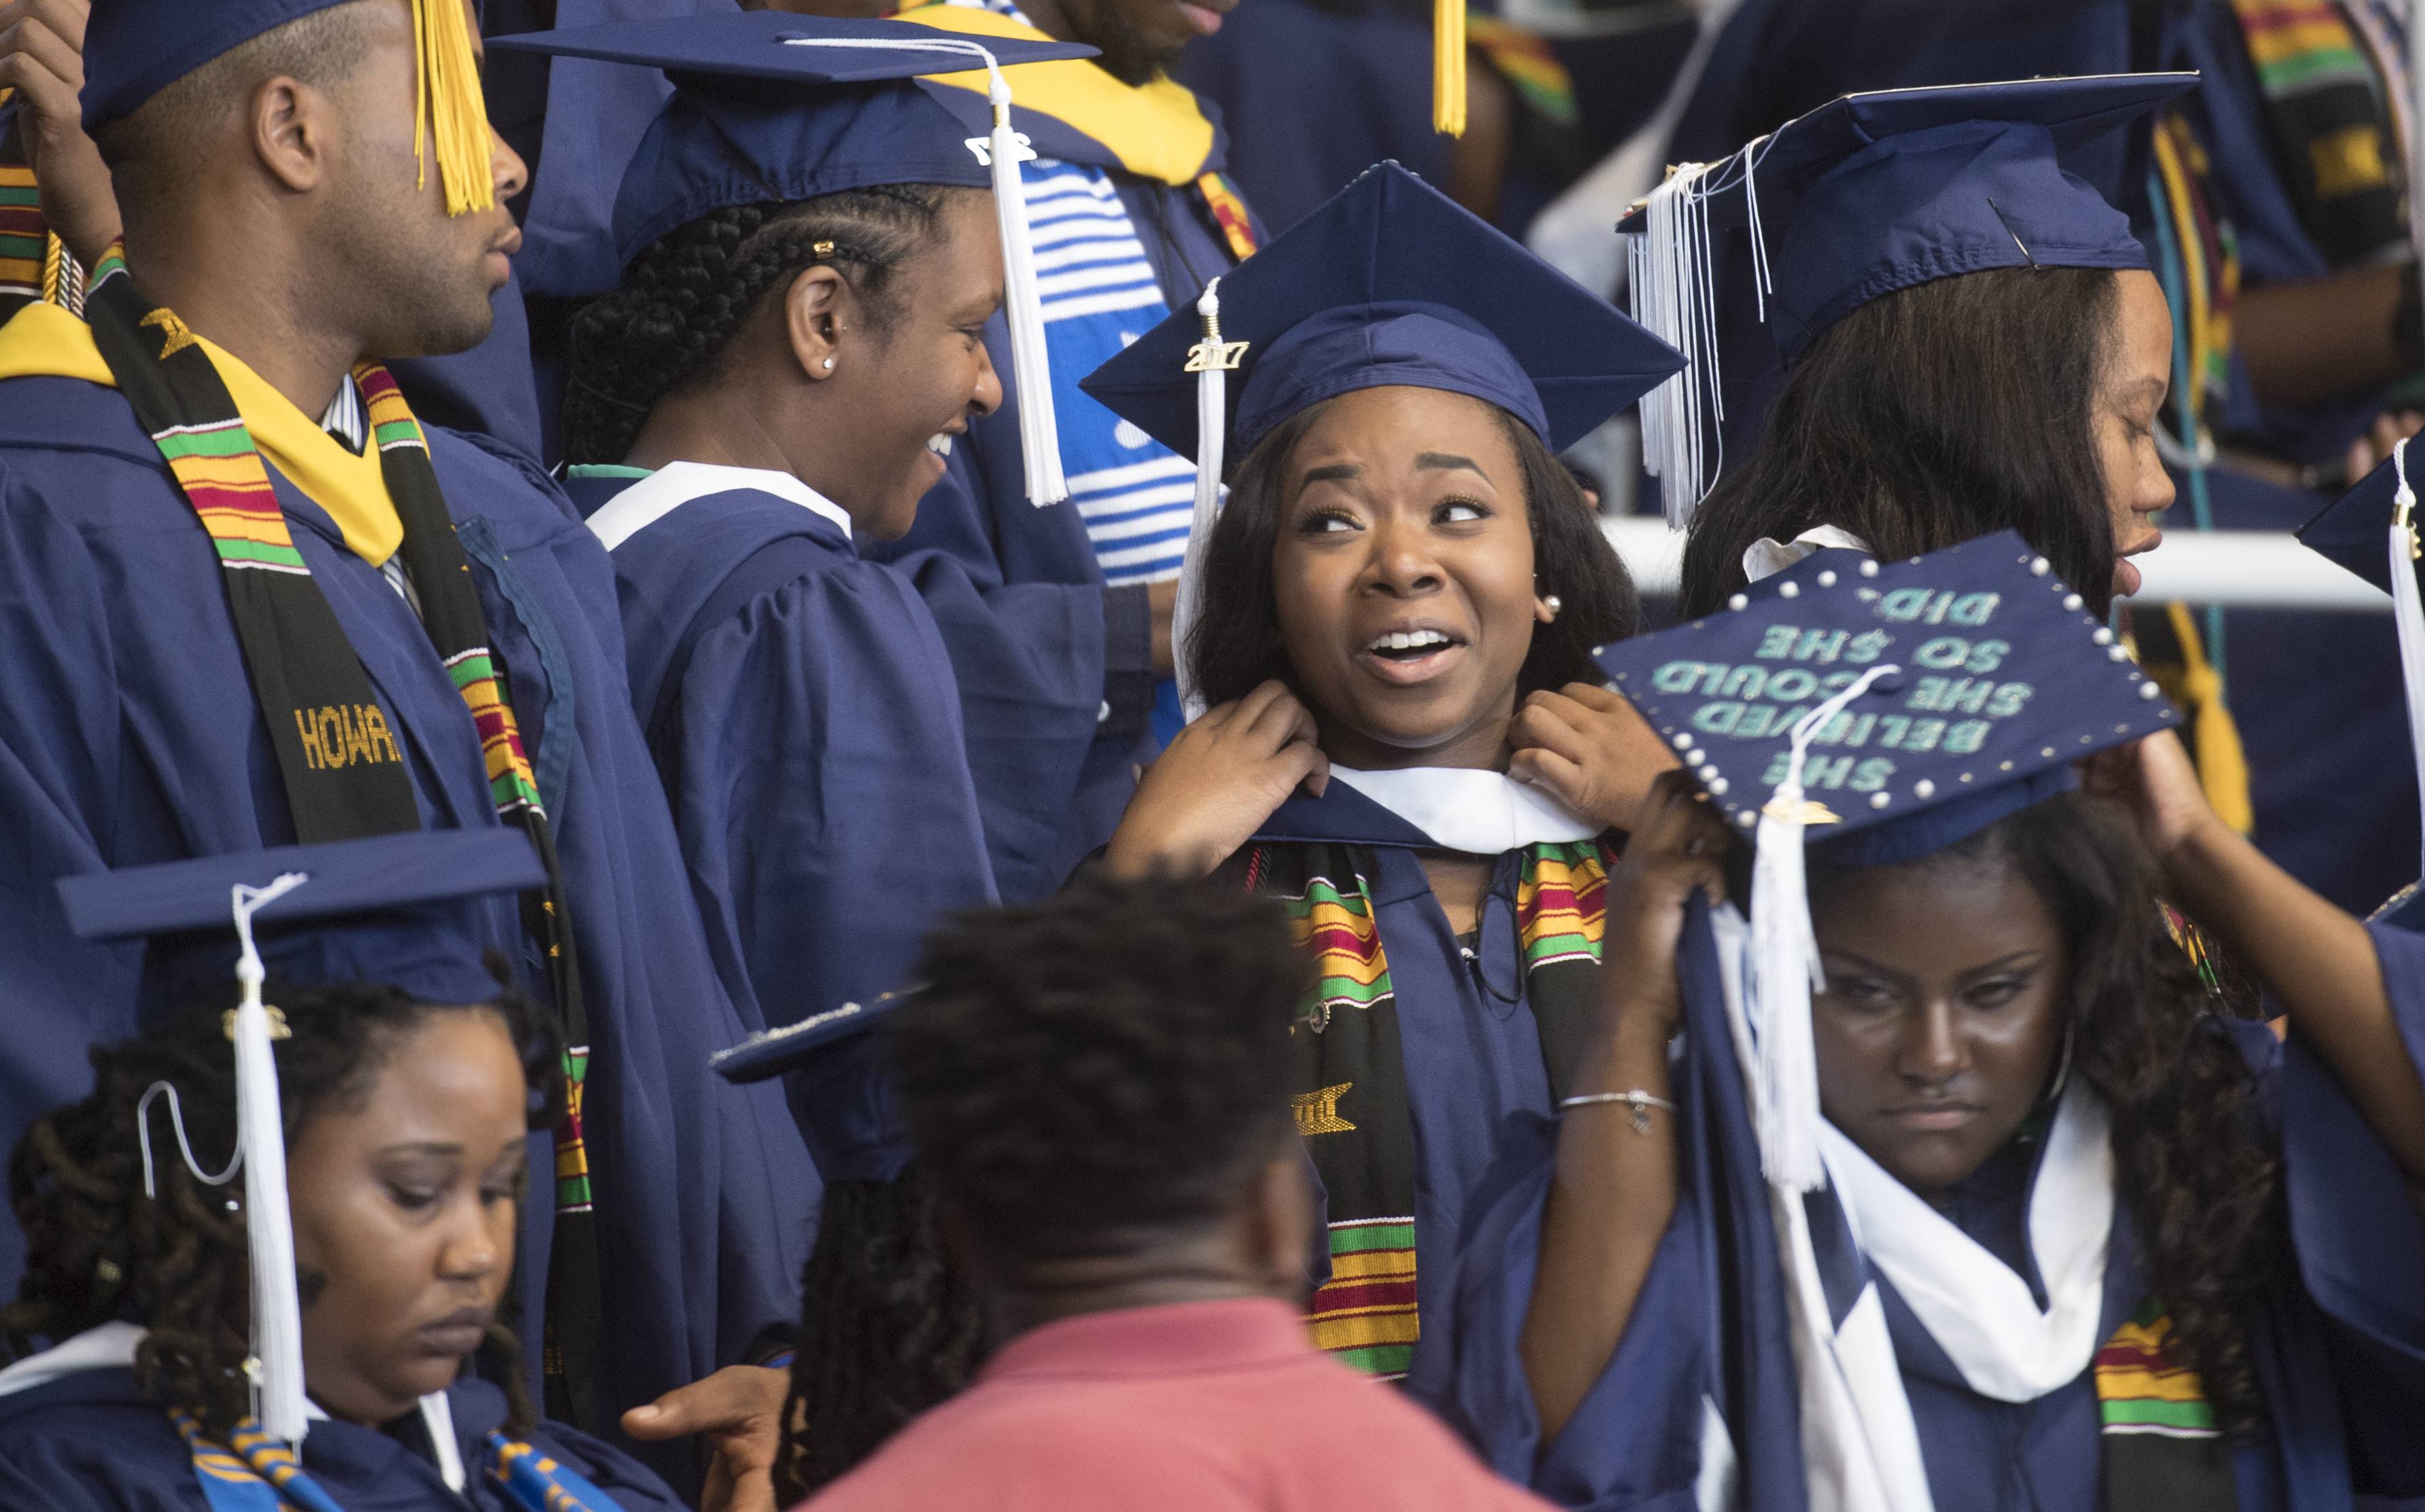 WASHINGTON DC - MAY 13:
Angel C. Dye (center) was able to  receive her undergraduate degree from the College of Arts and Sciences thanks to donors who stepped in to help. Dye celebrates  on the campus of  Howard University  in Washington, DC on May, 13, 2017.
In 2016, Angel Dye was trying to pursue her Howard University education, but like scores of other students at the prominent, financially strapped HBCU, she owed thousands, and had been kicked out of her dorm room and still took classes on the down low. A year later Dye receives her degree today,  with the help of donors who read her story  and is headed to graduate school. 
 (Photo by Marvin Joseph/The Washington Post via Getty Images)